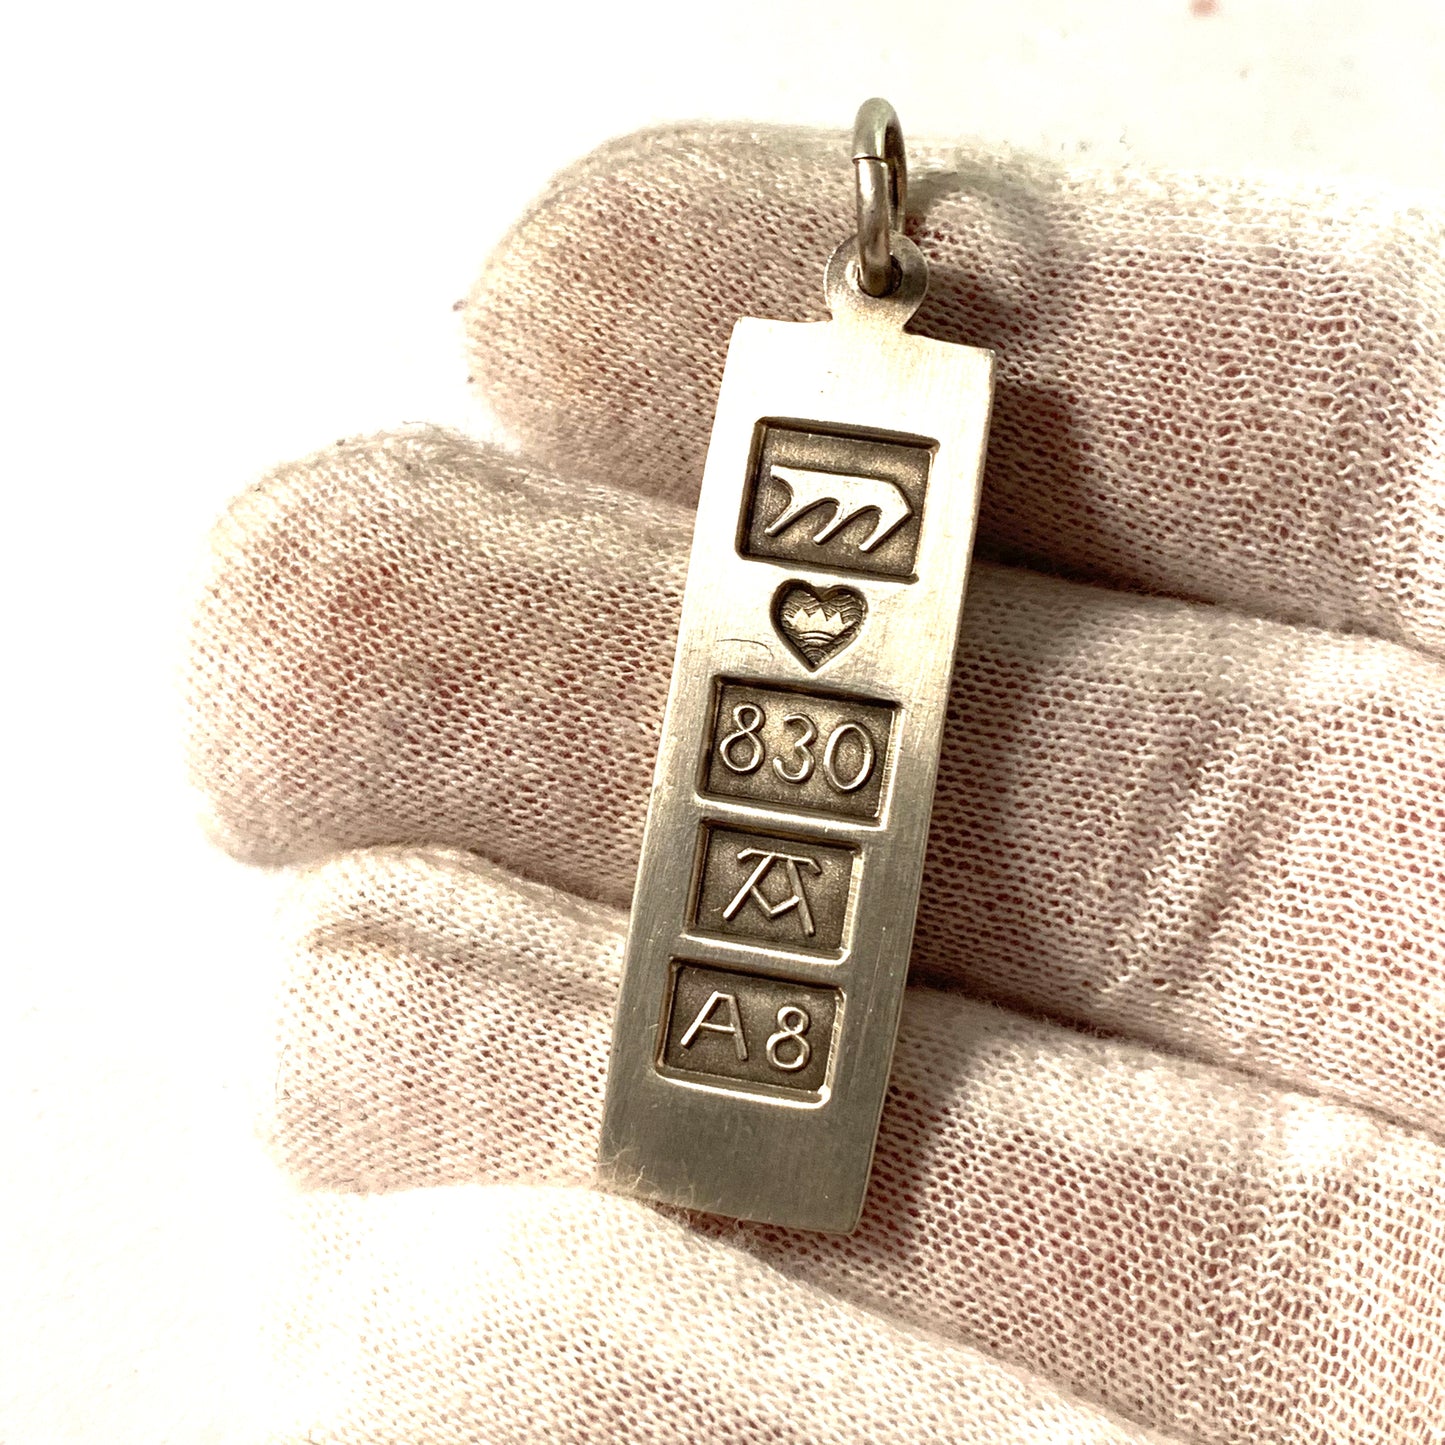 Sten & Laine, Finland year 1978 Solid 830 Silver Pendant.